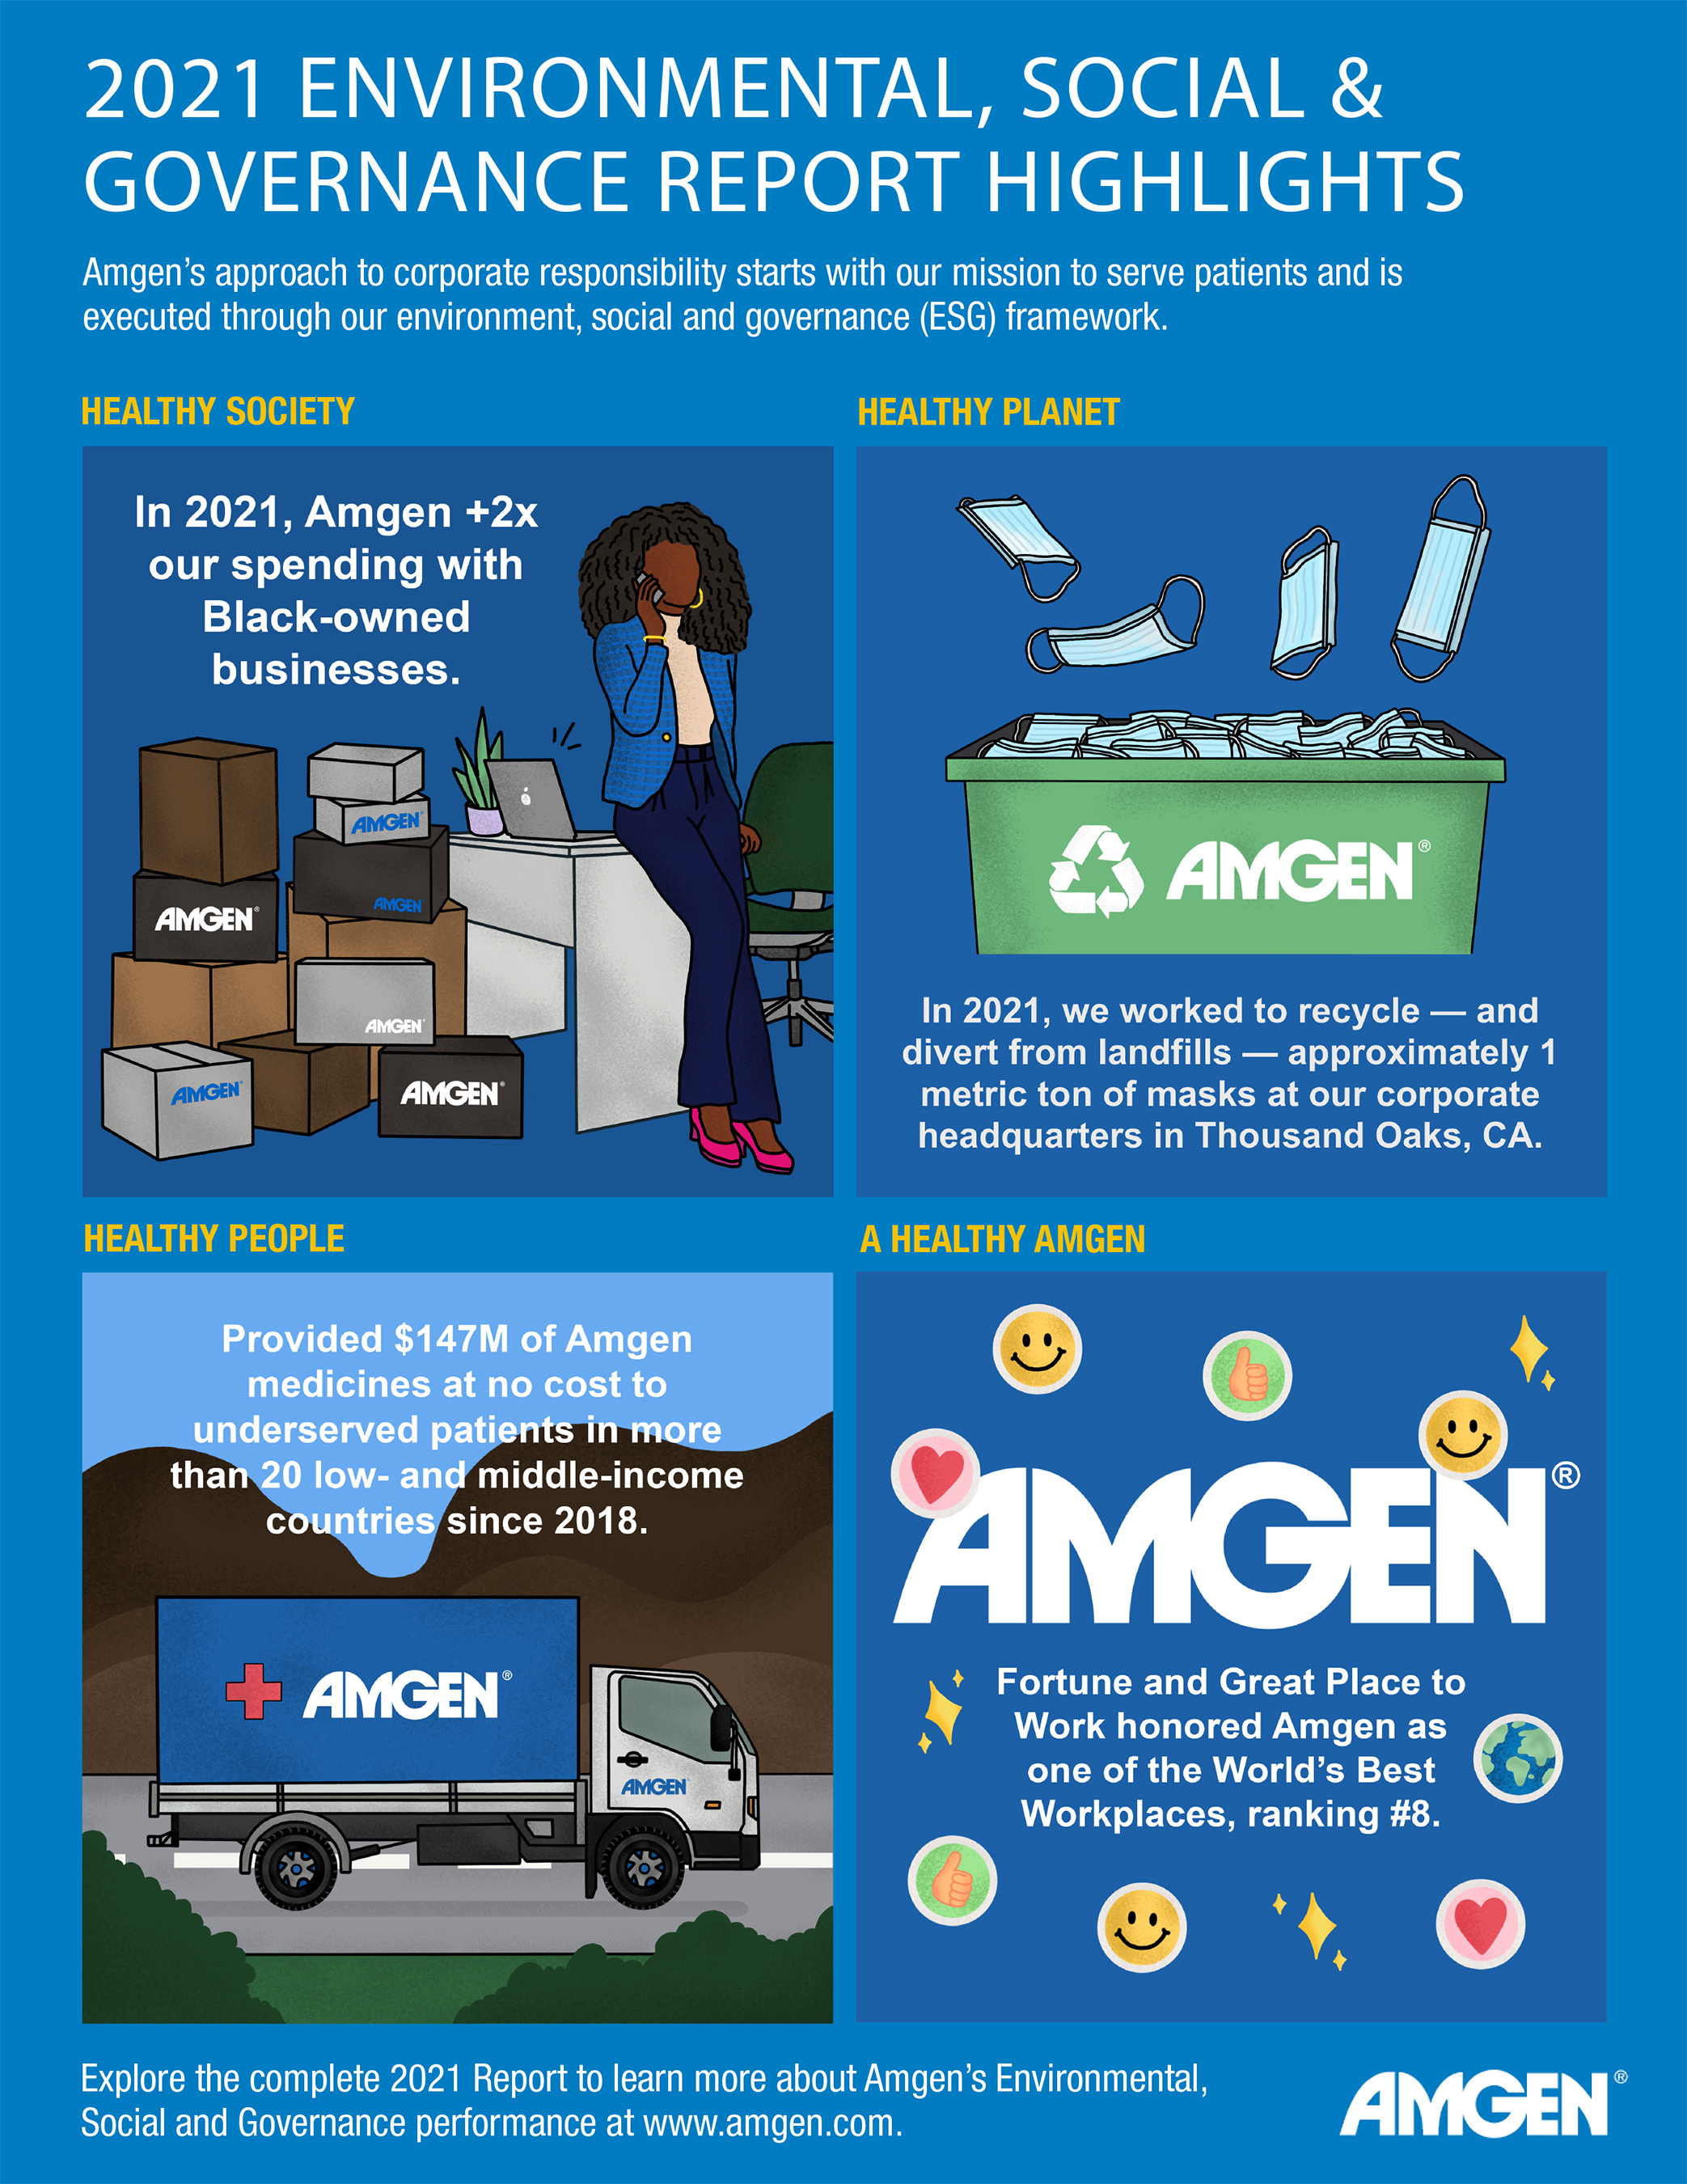 Amgen’s approach to corporate responsibility starts with our mission to serve patients and is executed through our environment, social and governance (ESG) framework. Here are highlights from our 2021 ESG report.